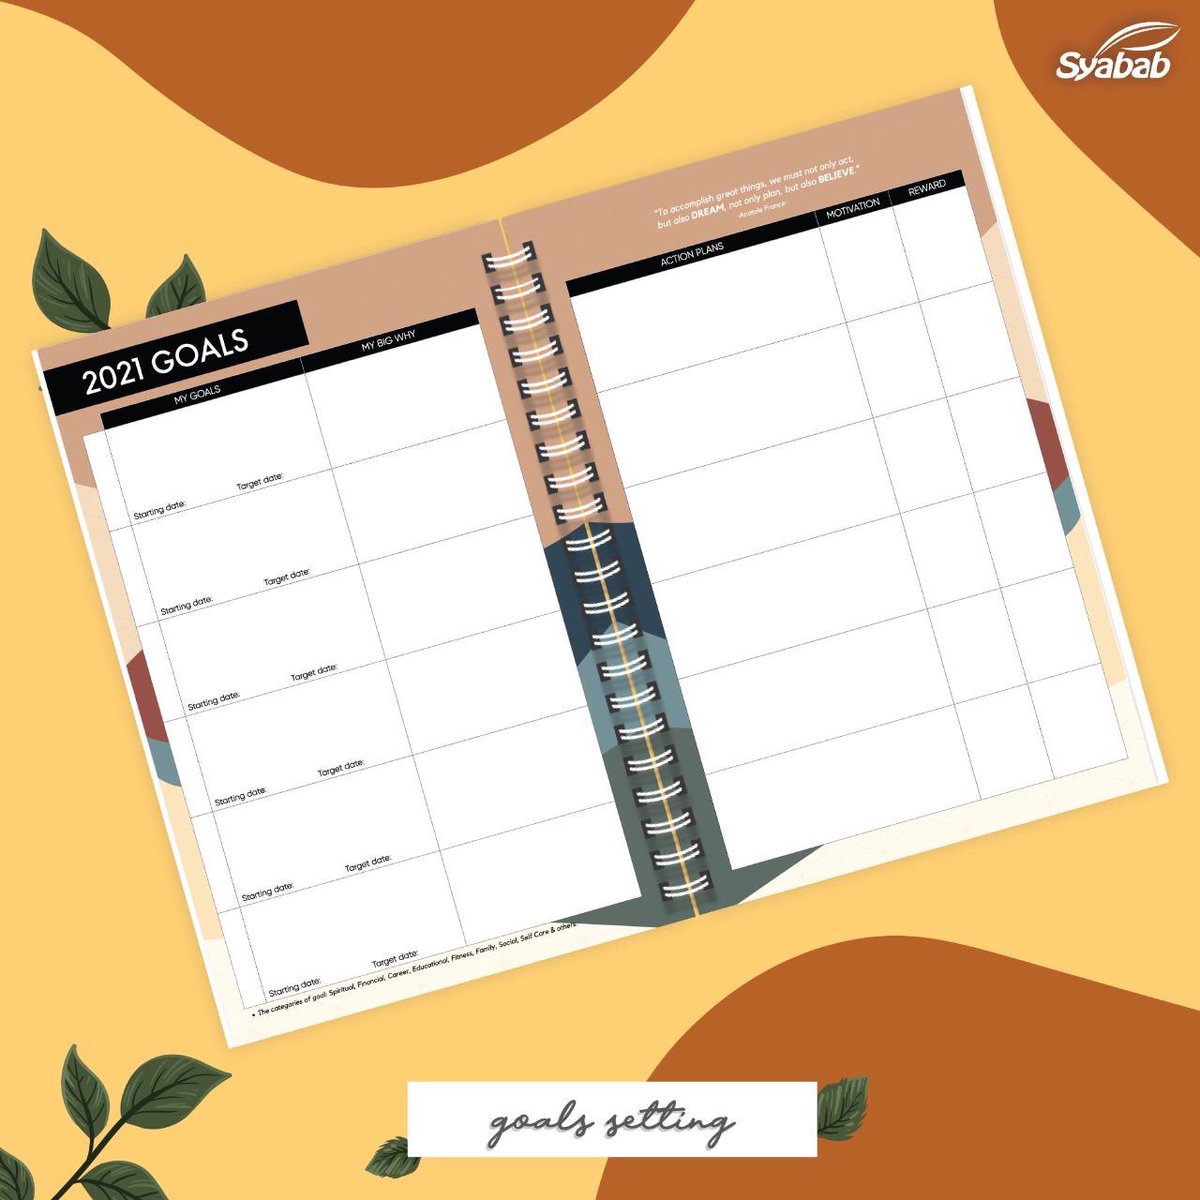 CONTENT EXCLUSIVE PLANNER 2021 Vision board 2021 goals Time to travel Time to exercise Checklist Khatam quran Yearly reading log Blank pages 40+ Calendar 2021 Calendar Hijri (1442H-1443H) Monthly plan Weekly & daily plan Mutabaah amal